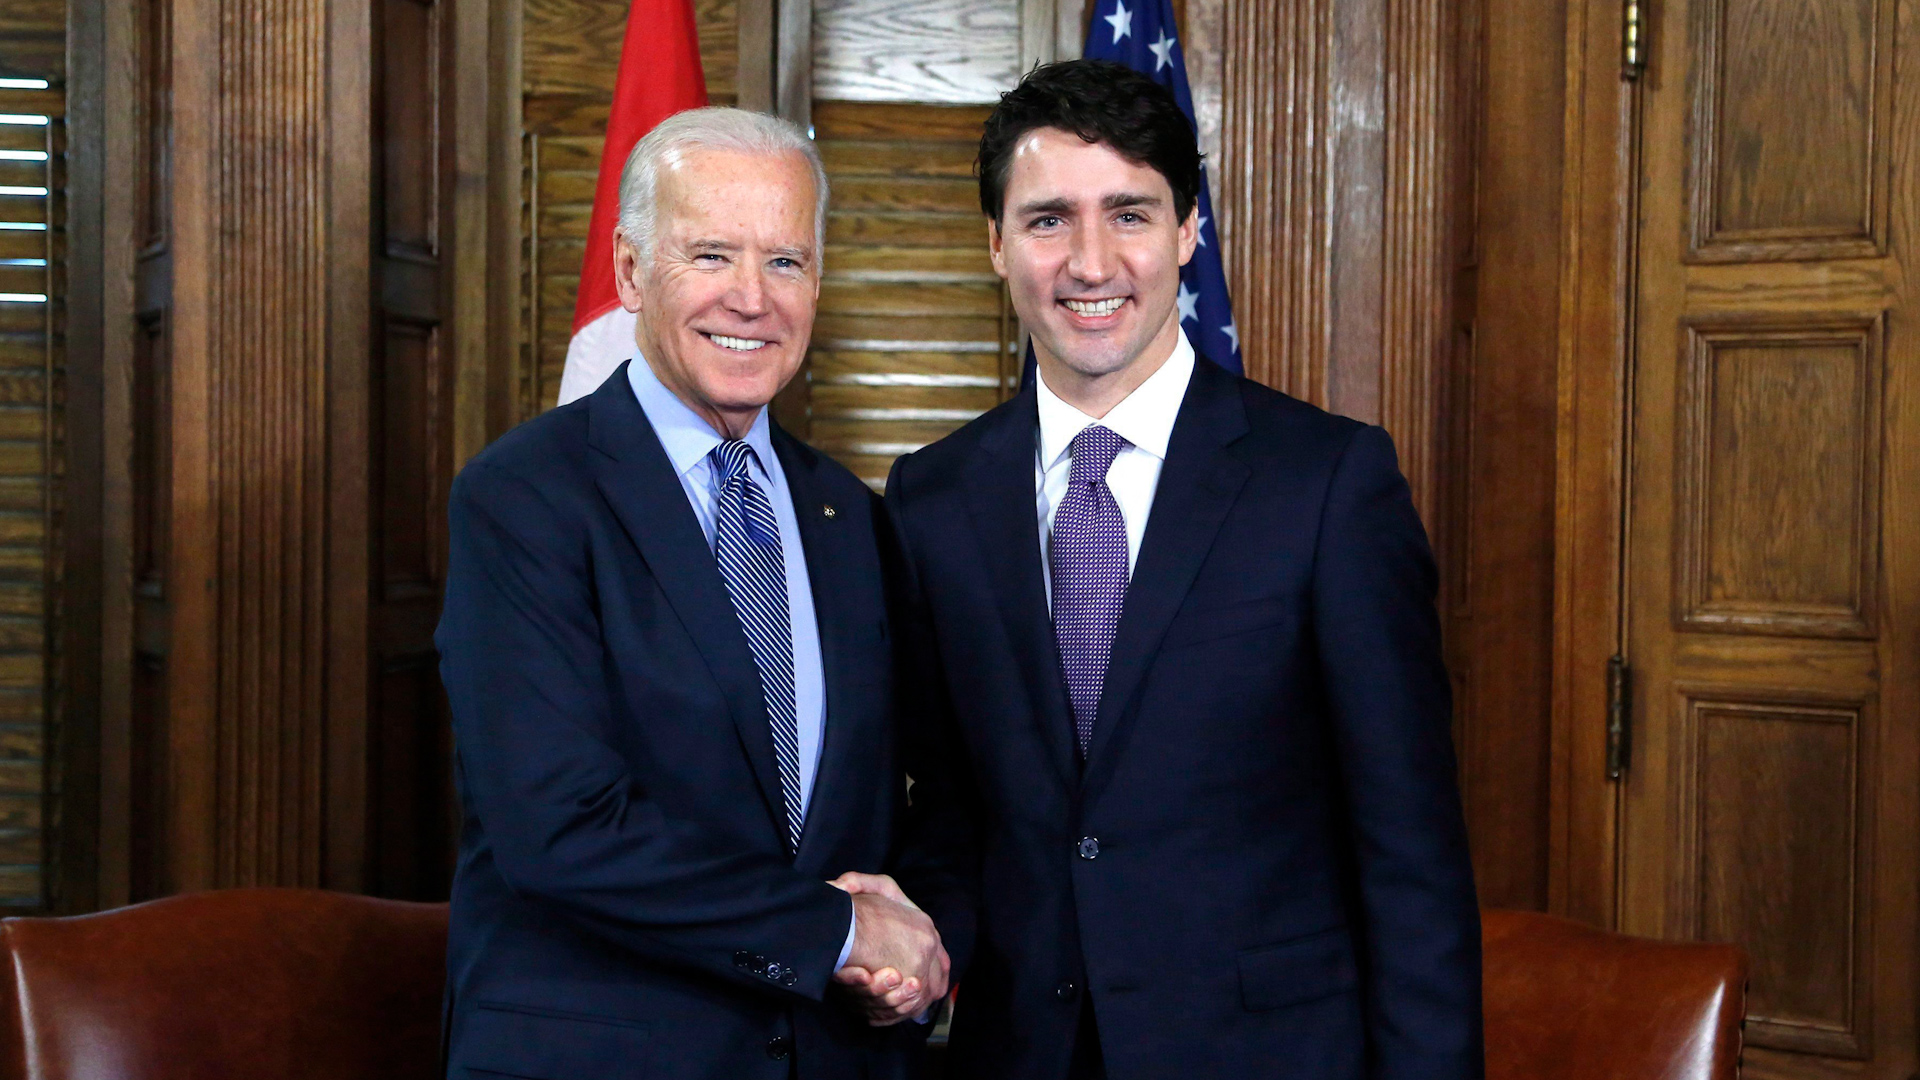 Biden's First Conversation Is with the Prime Minister of Canada!